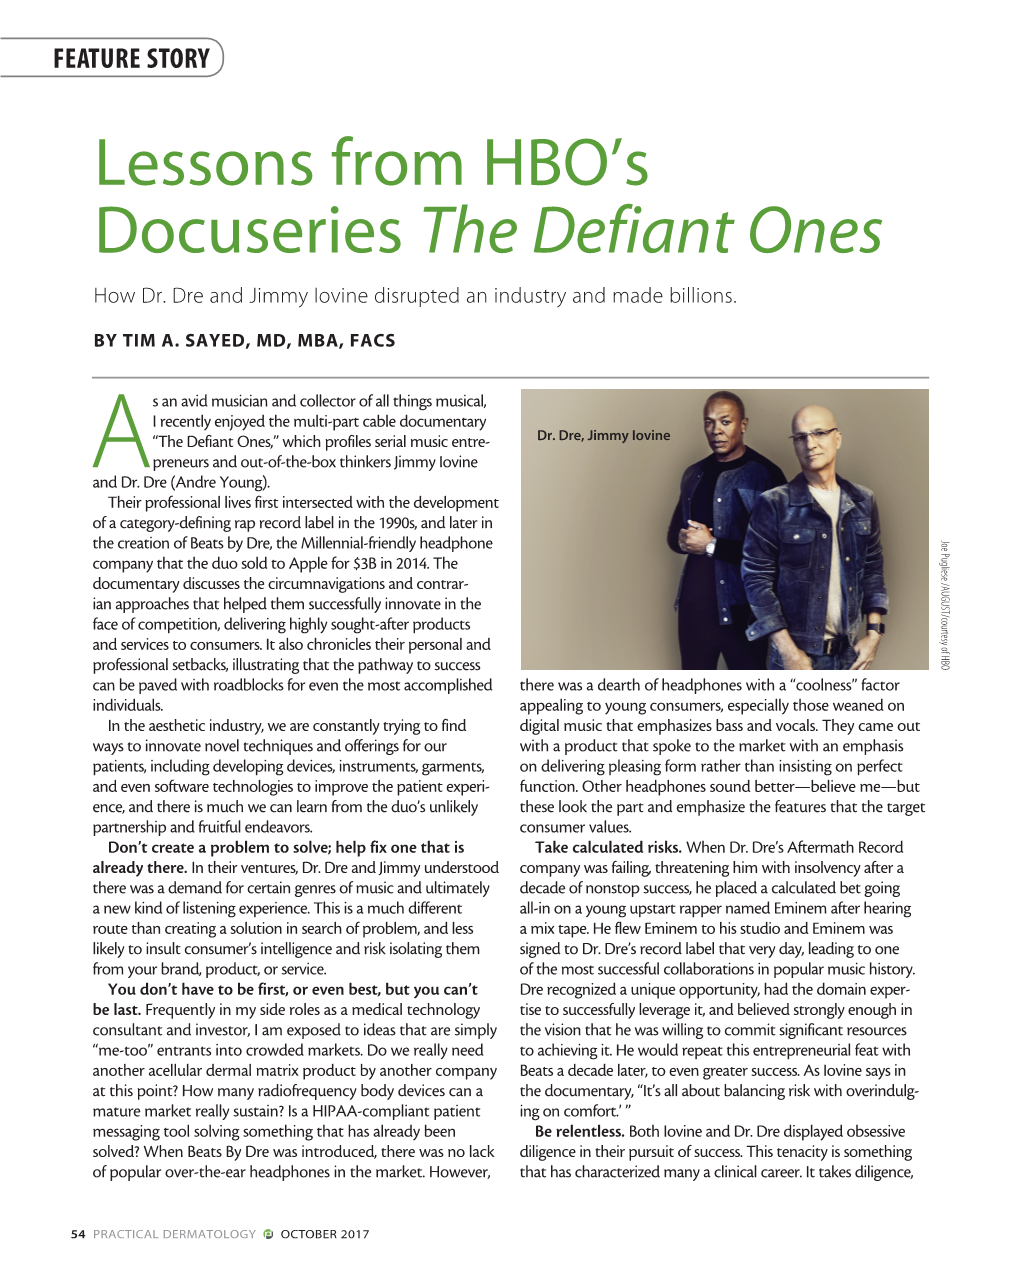 Lessons from HBO's Docuseries the Defiant Ones